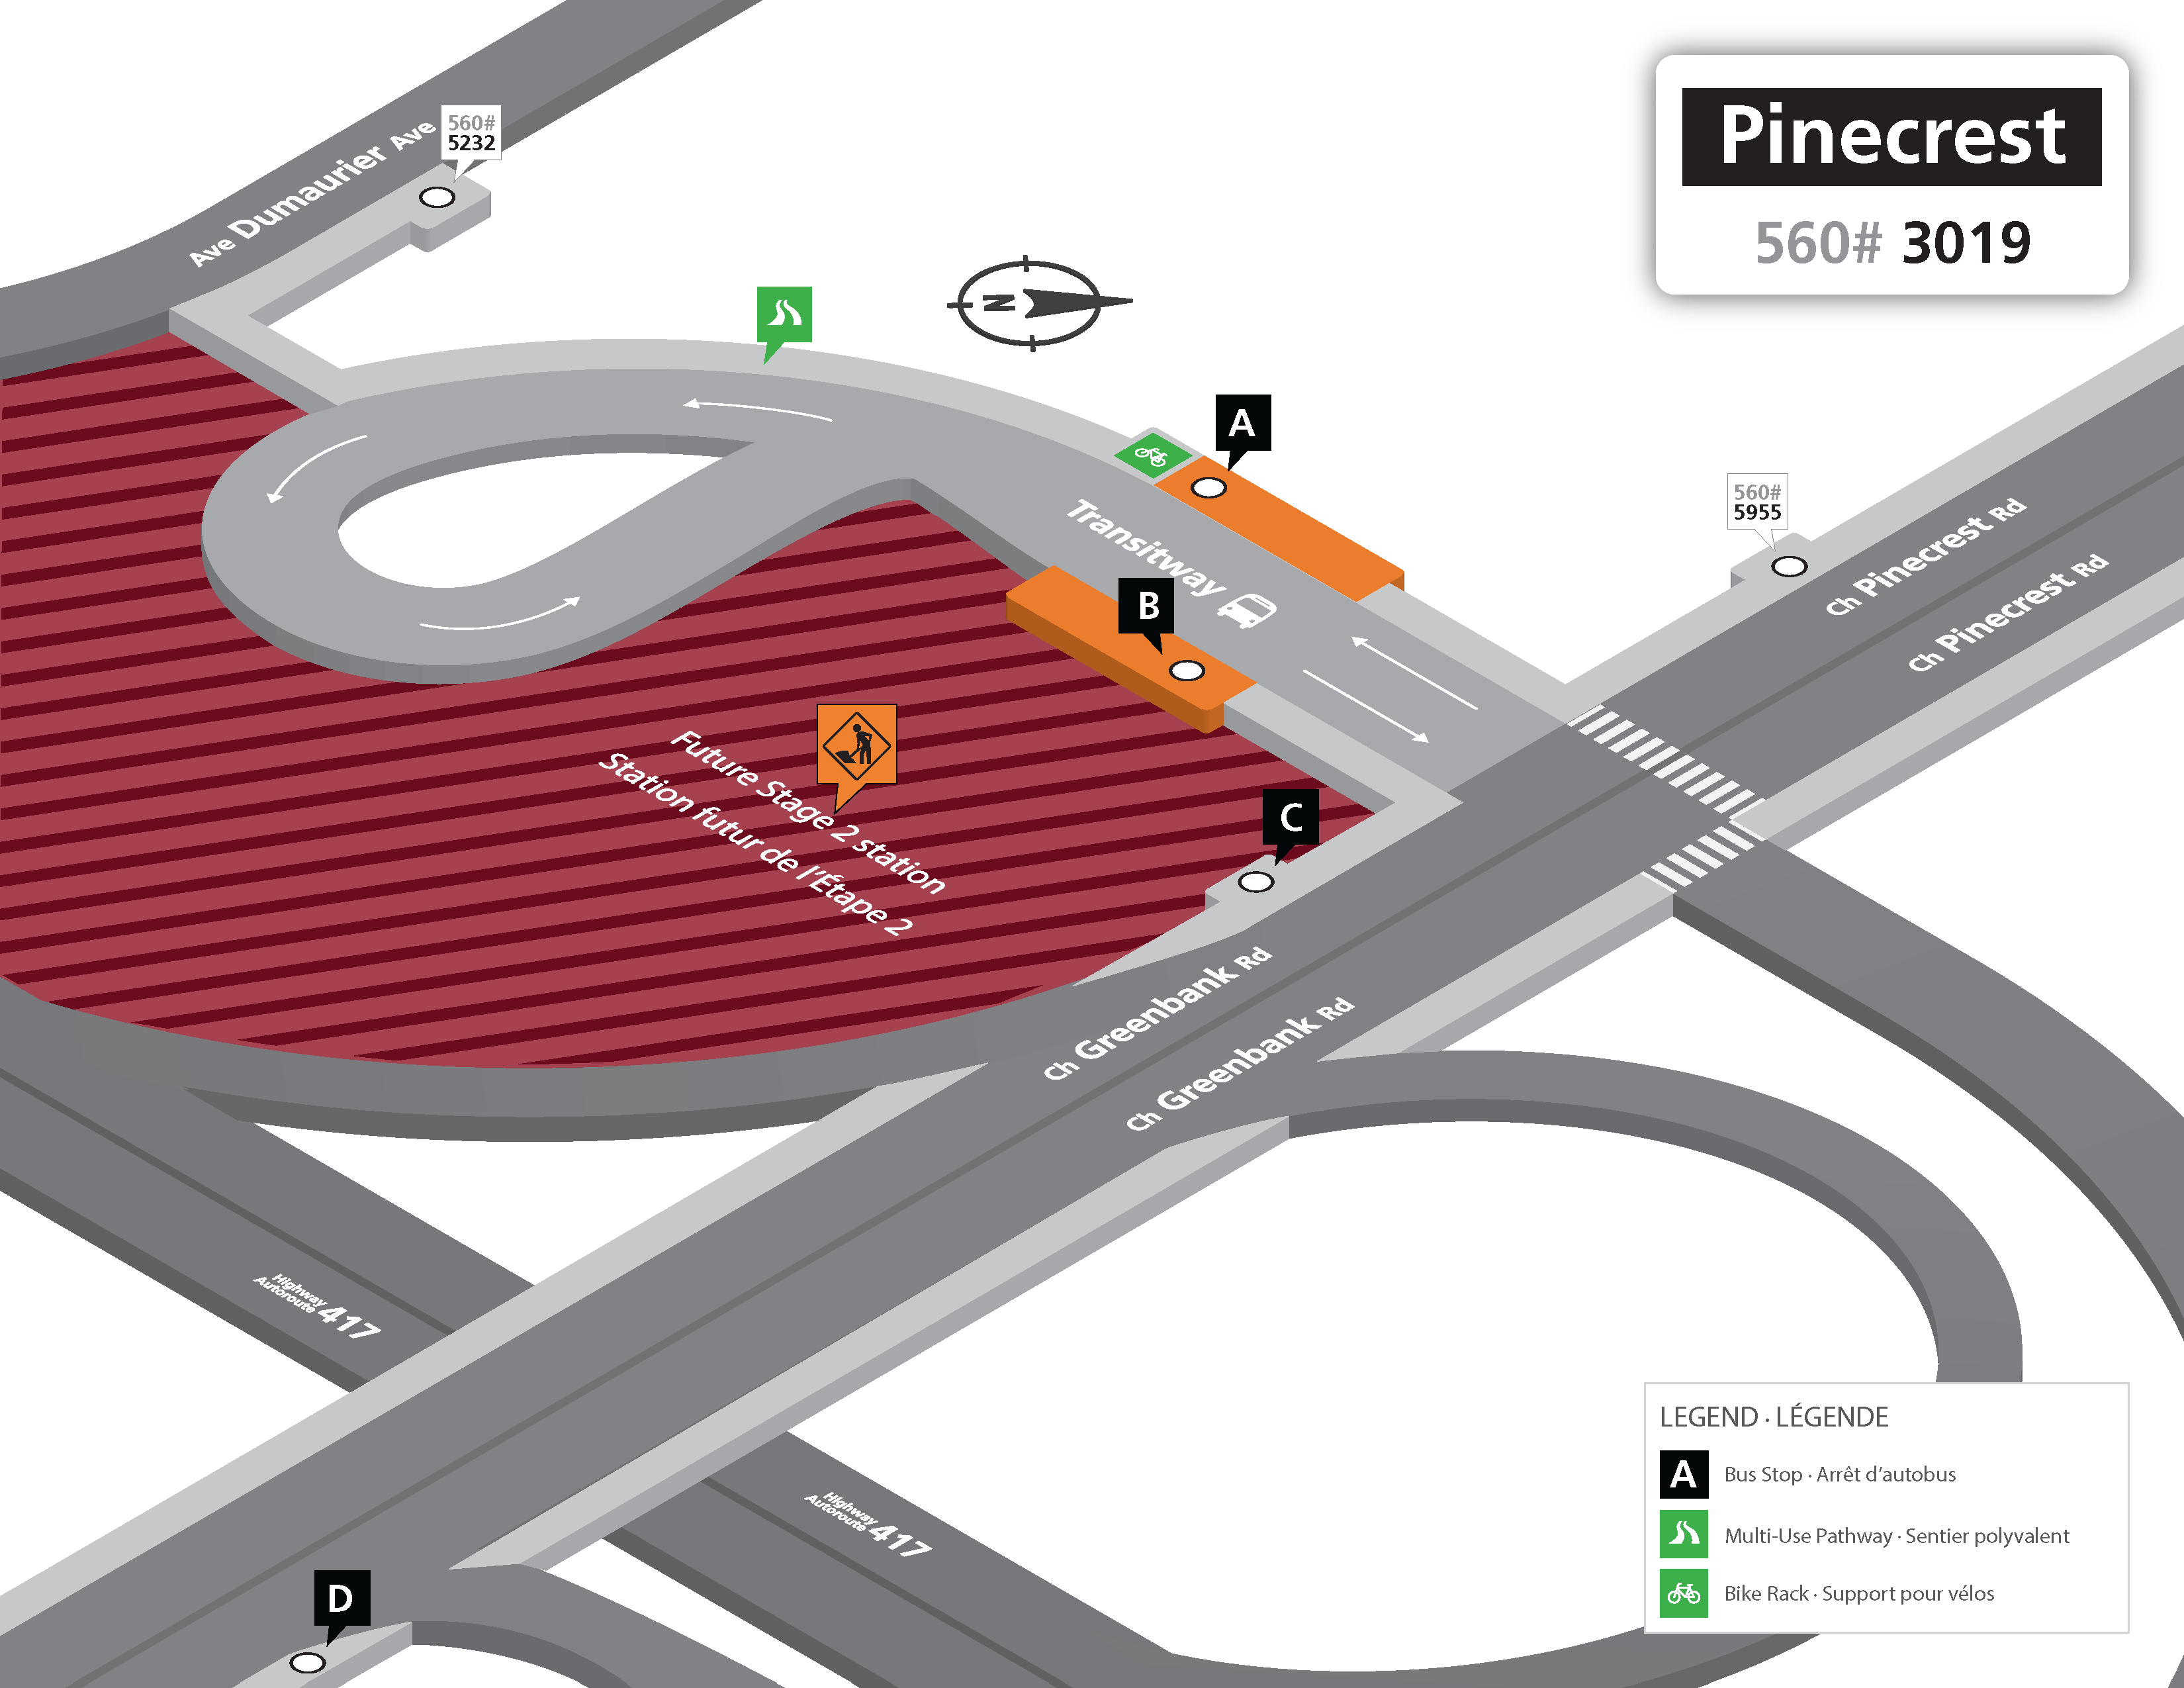 Image - Stage 2 : Transitway closure (Pinecrest Station to Bayshore Station)